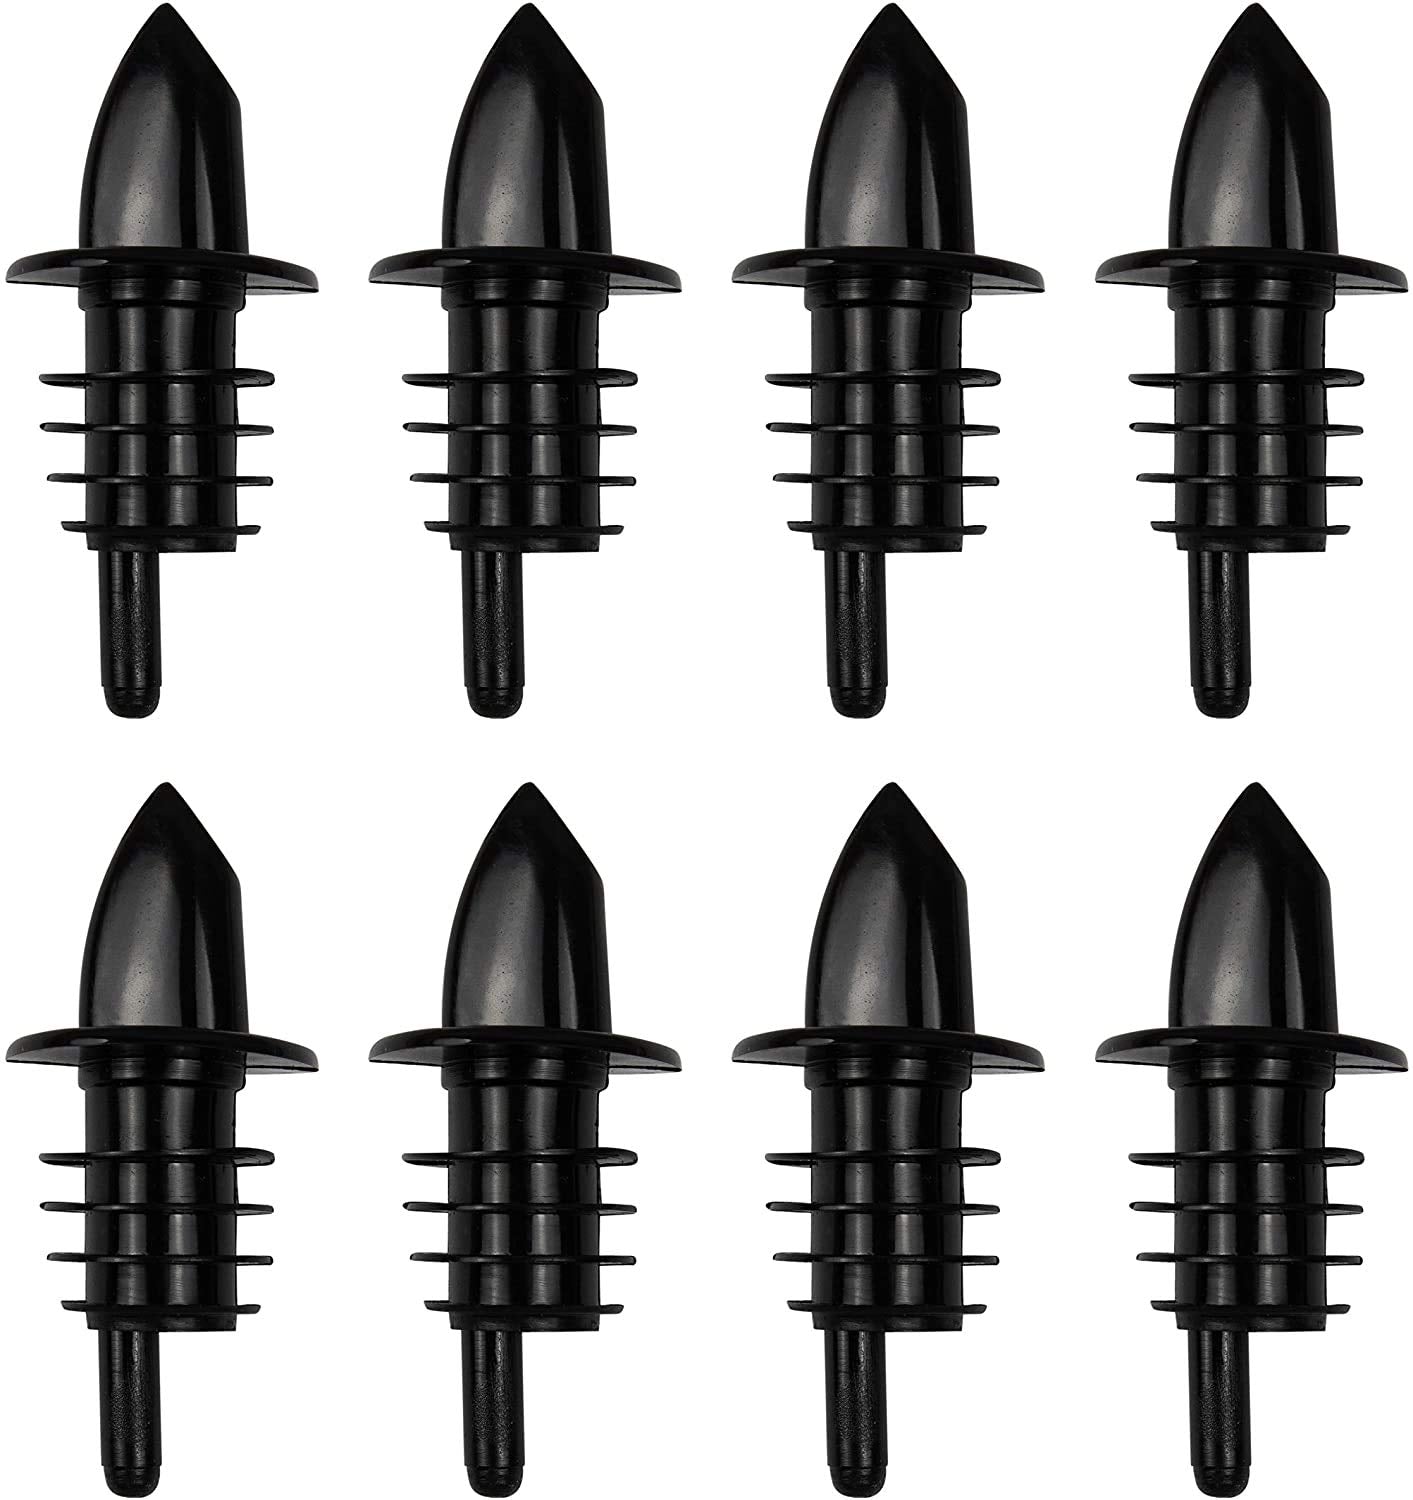 NJ Free-Flow Liquor Bottle Speed Pourers with Tapered Spout, Plastic Free Flow Liquor Bottle Pourer for Bar, Hotel, Restaurant and Home use : 8 Pcs Black